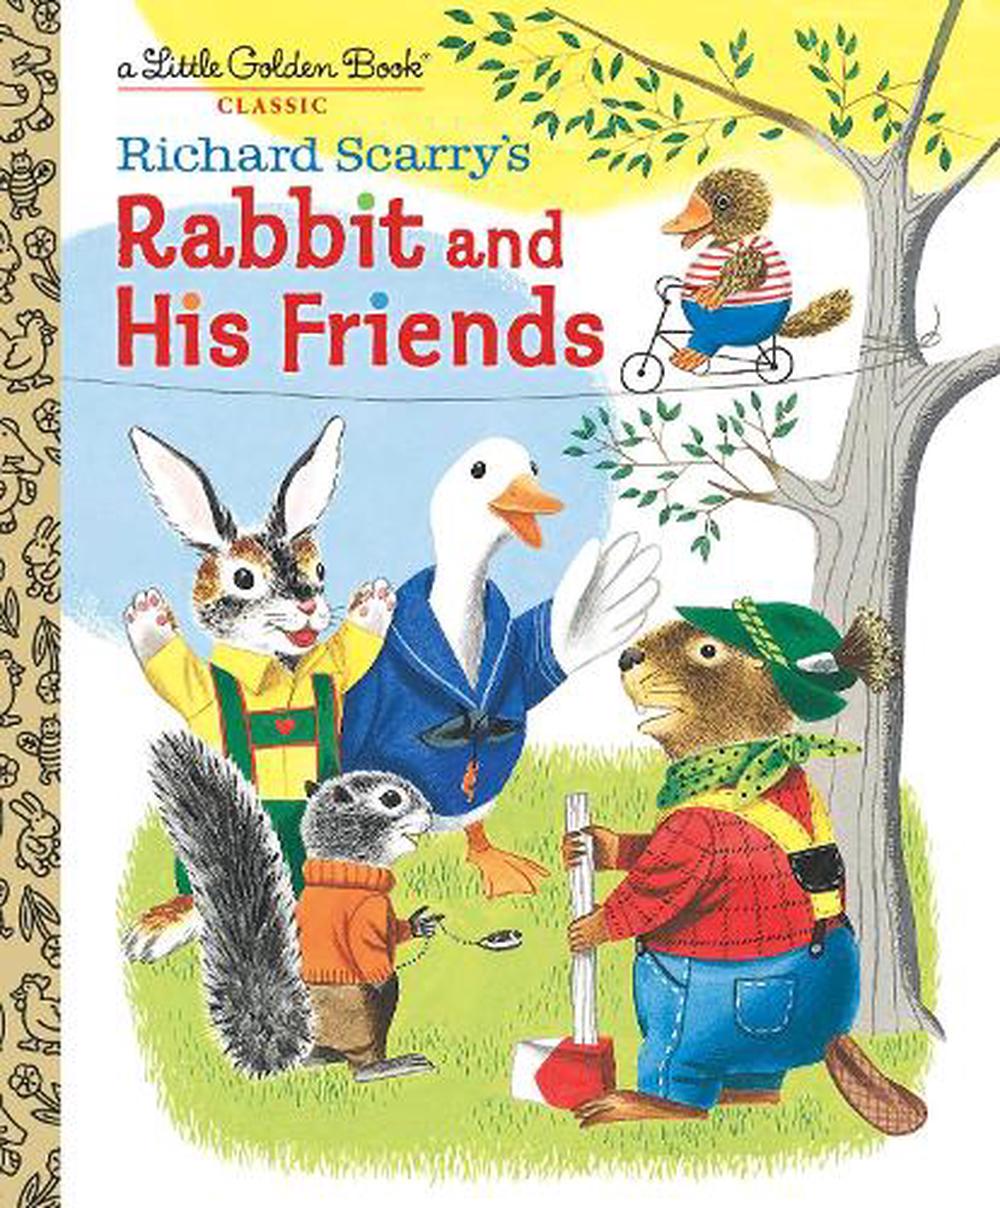 9781984849892　online　by　His　Rabbit　and　Buy　Nile　Friends　The　Richard　Scarry's　Hardcover,　at　Richard　Scarry,